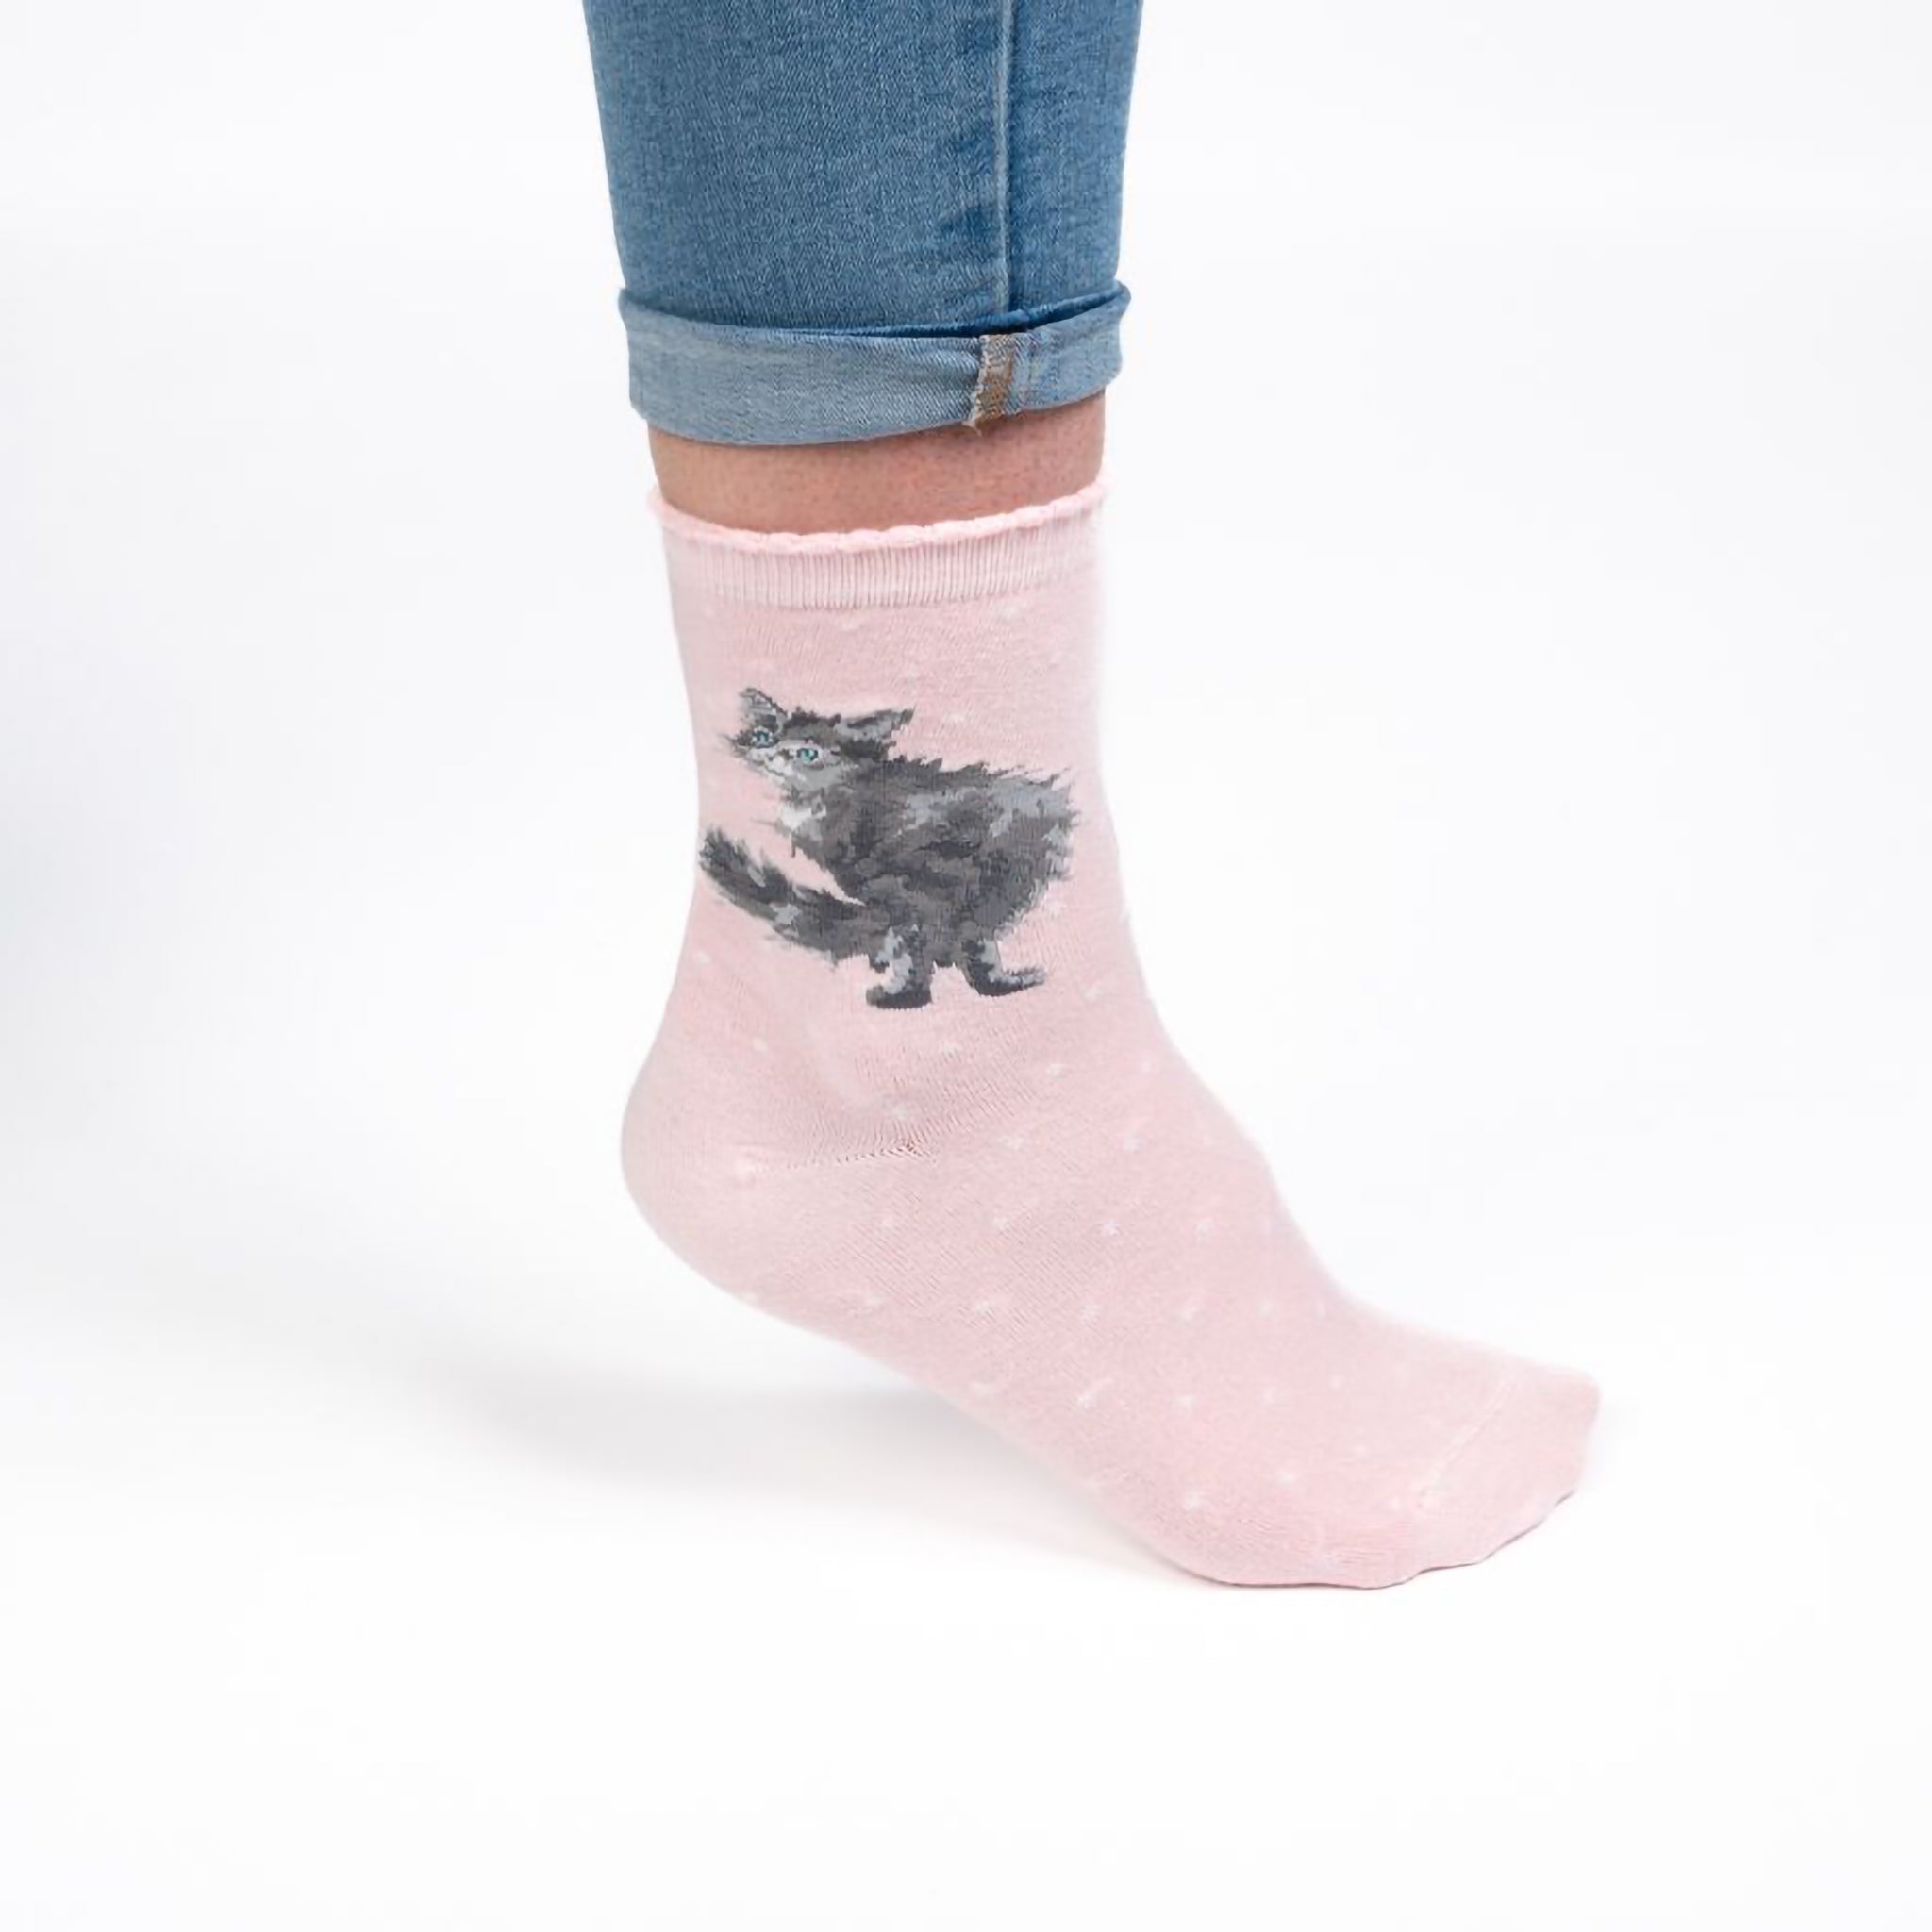 Model wearing a pair of blush pink socks with a fluffy cat picture and white polka dots